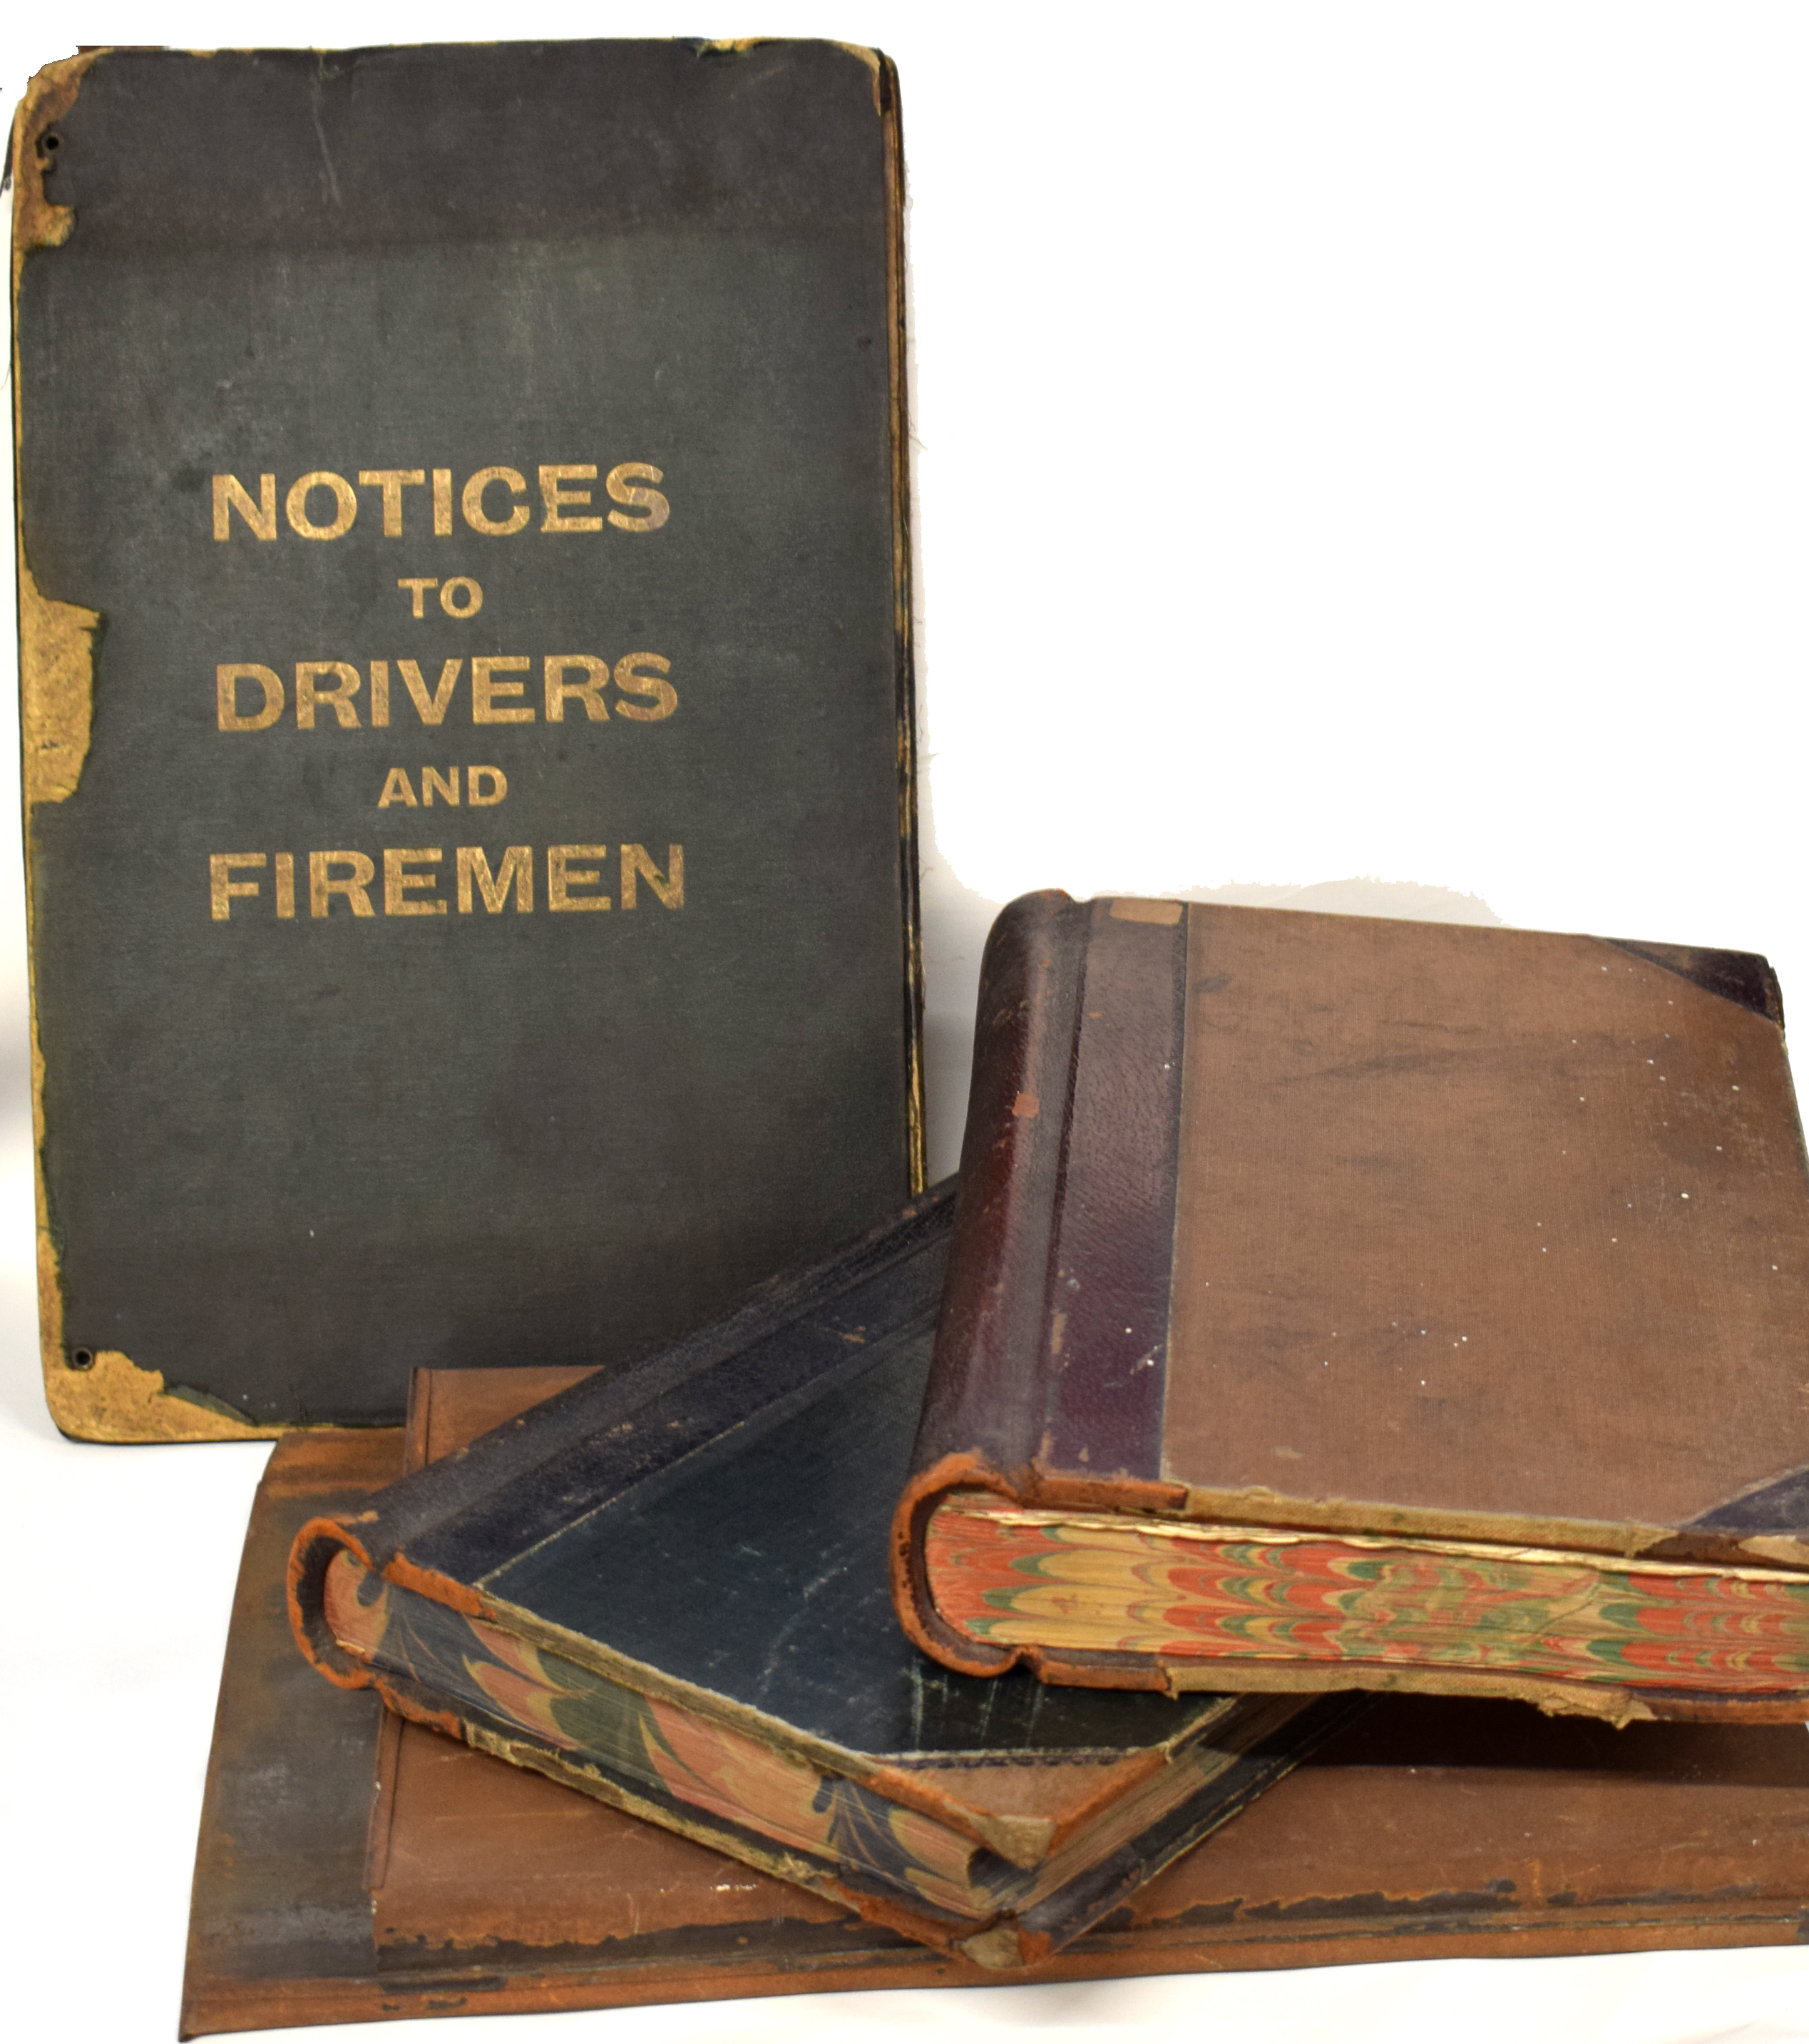 Three volumes of railway interest: one "Notices to Drivers and Firemen" in tin case, together with